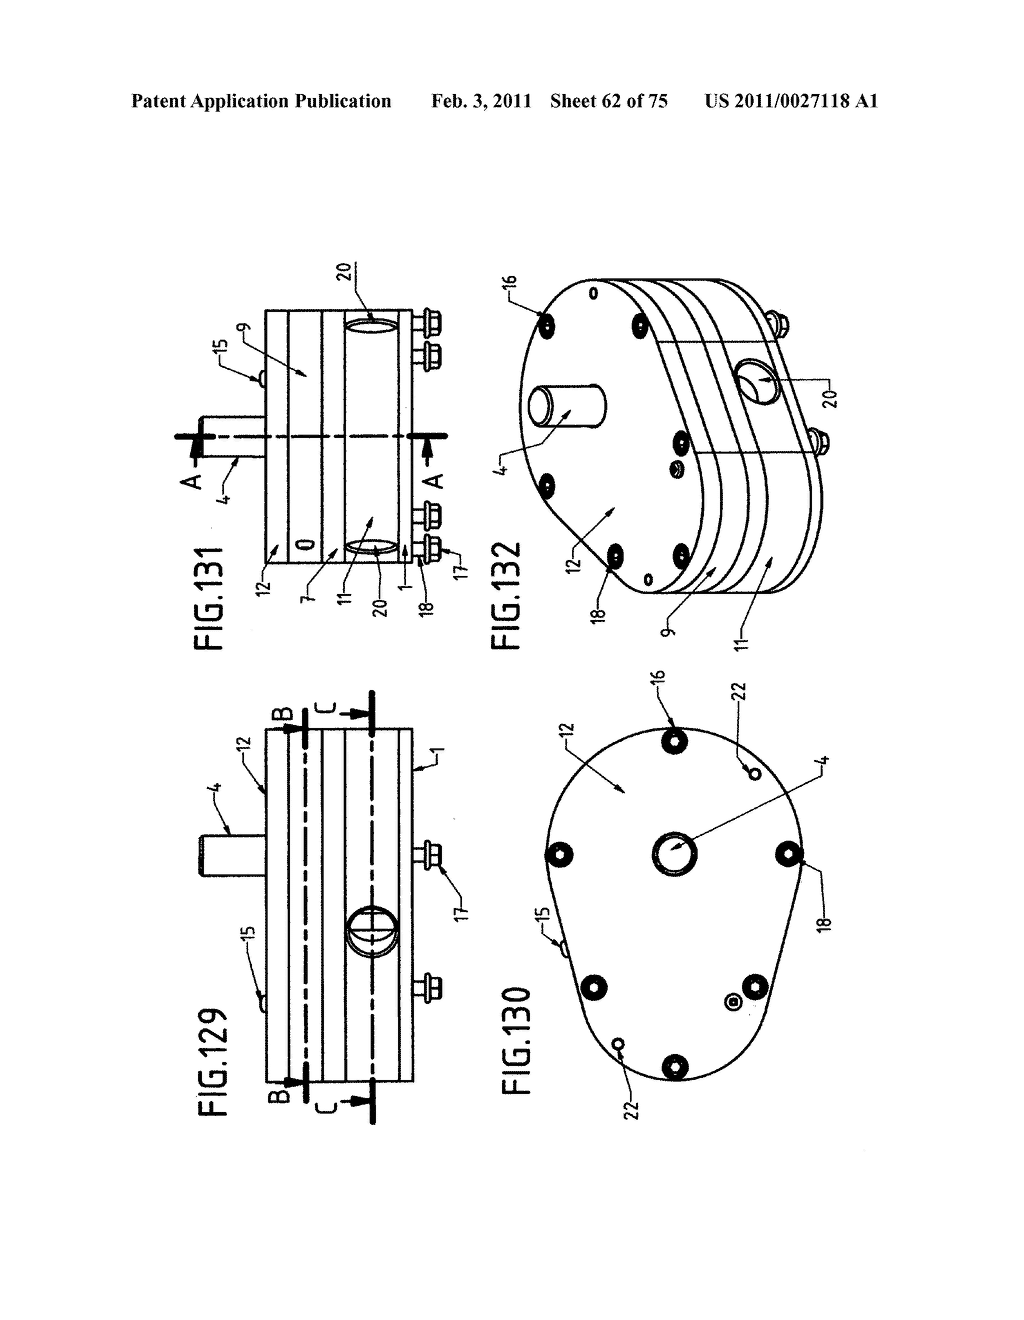 DEVICE WITH ROTARY PISTONS THAT CAN BE USED AS A COMPRESSOR, A PUMP, A VACUUM PUMP, A TURBINE, A MOTOR AND AS OTHER DRIVING AND DRIVEN HYDRAULIC-PNEUMATIC MACHINES - diagram, schematic, and image 63